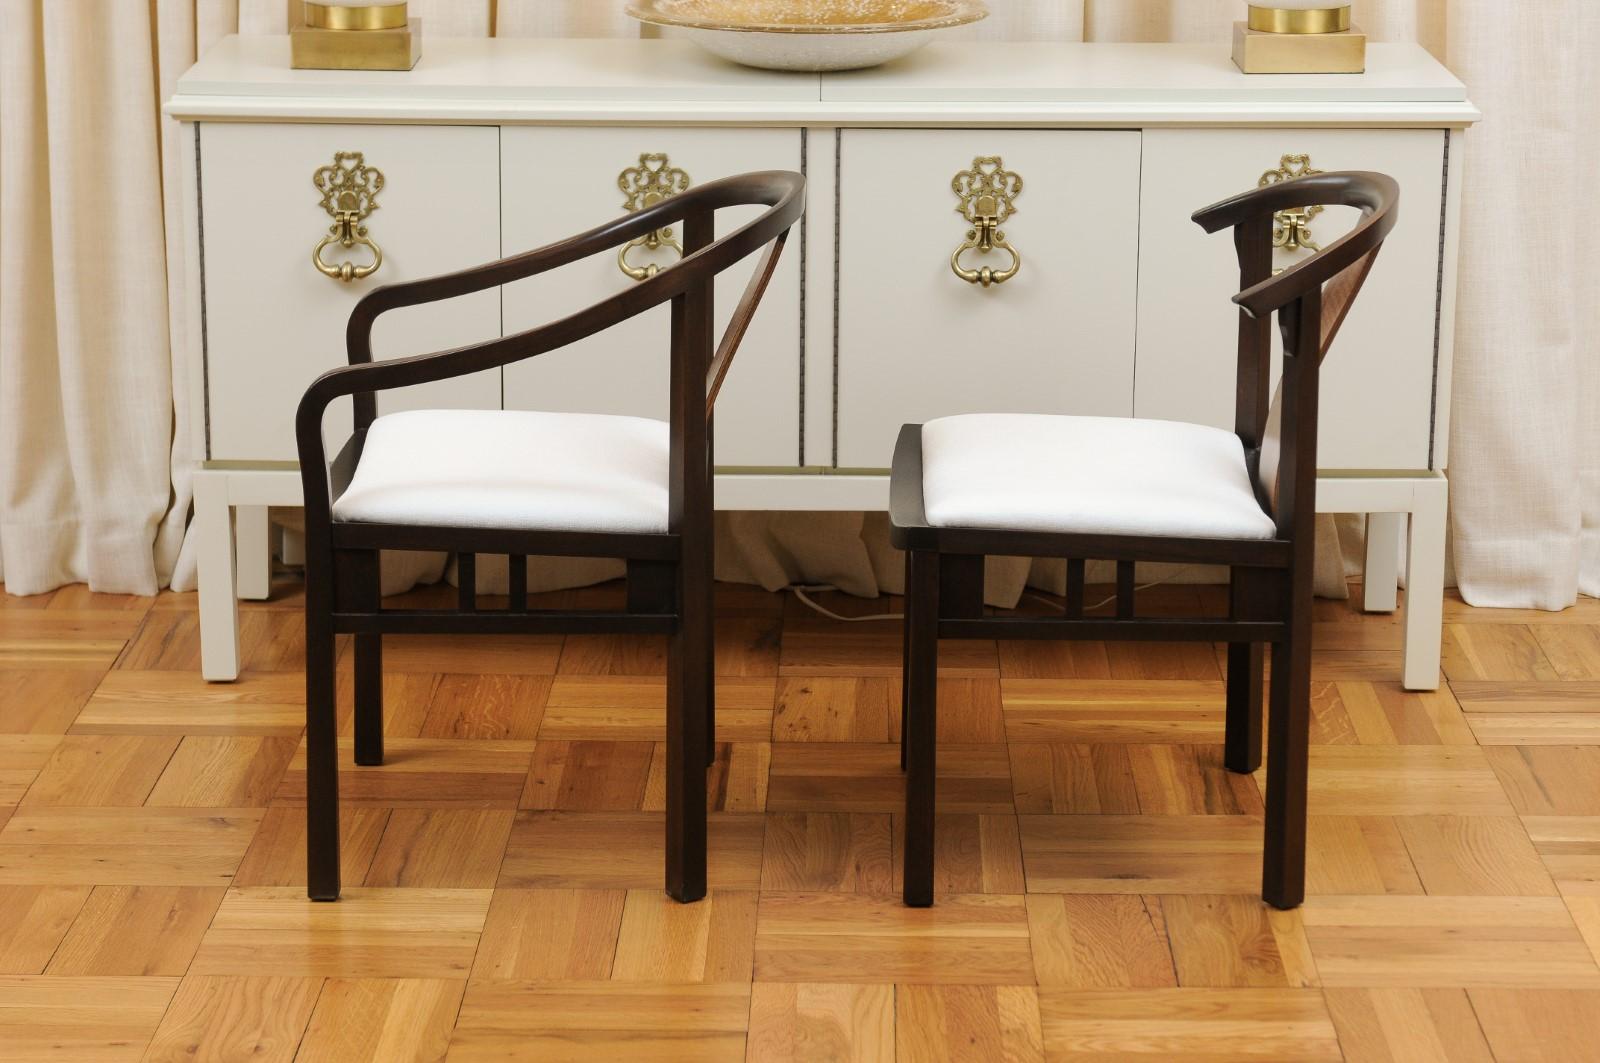 Incredible Set of 14 Rare Walnut Dining Chairs by Michael Taylor, circa 1955 For Sale 3